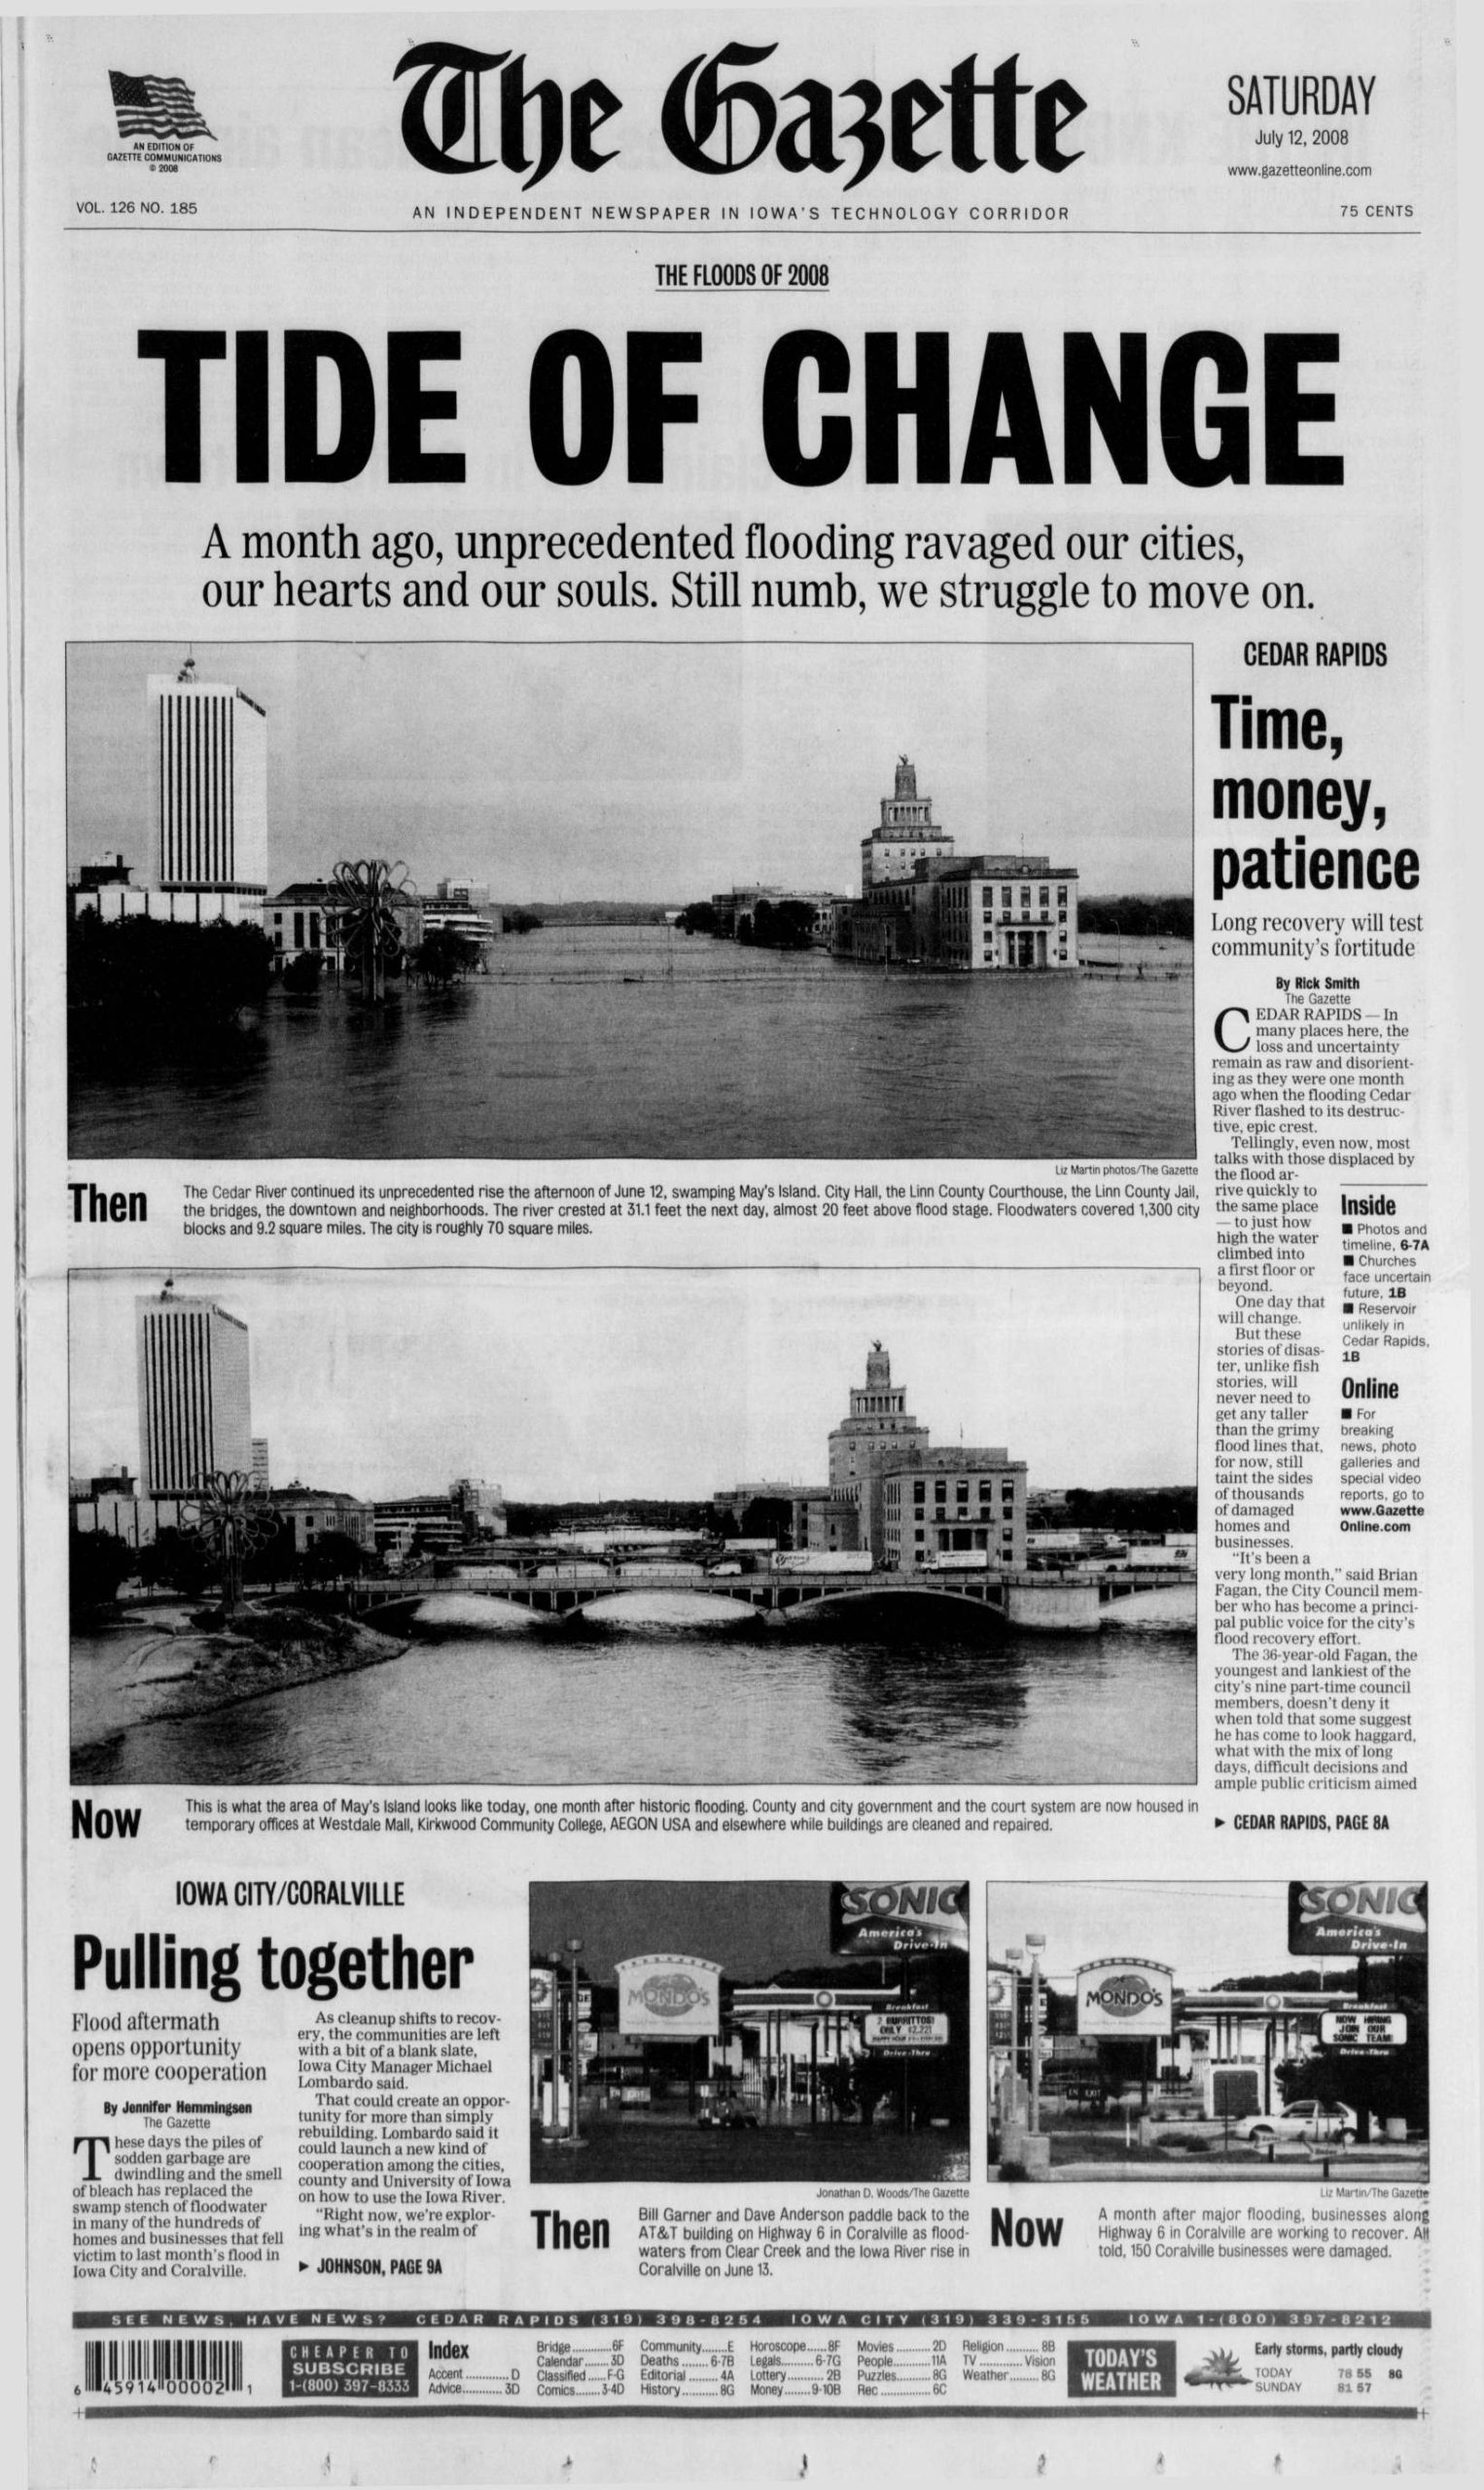 Gazette front page that reads TIDE OF CHANGE: A month ago, unprecedented flooding ravaged our cities, our hearts, and our souls. Still numb, we struggle to move on. Photos show the high water that put May's Island underwater and again after it retreated.